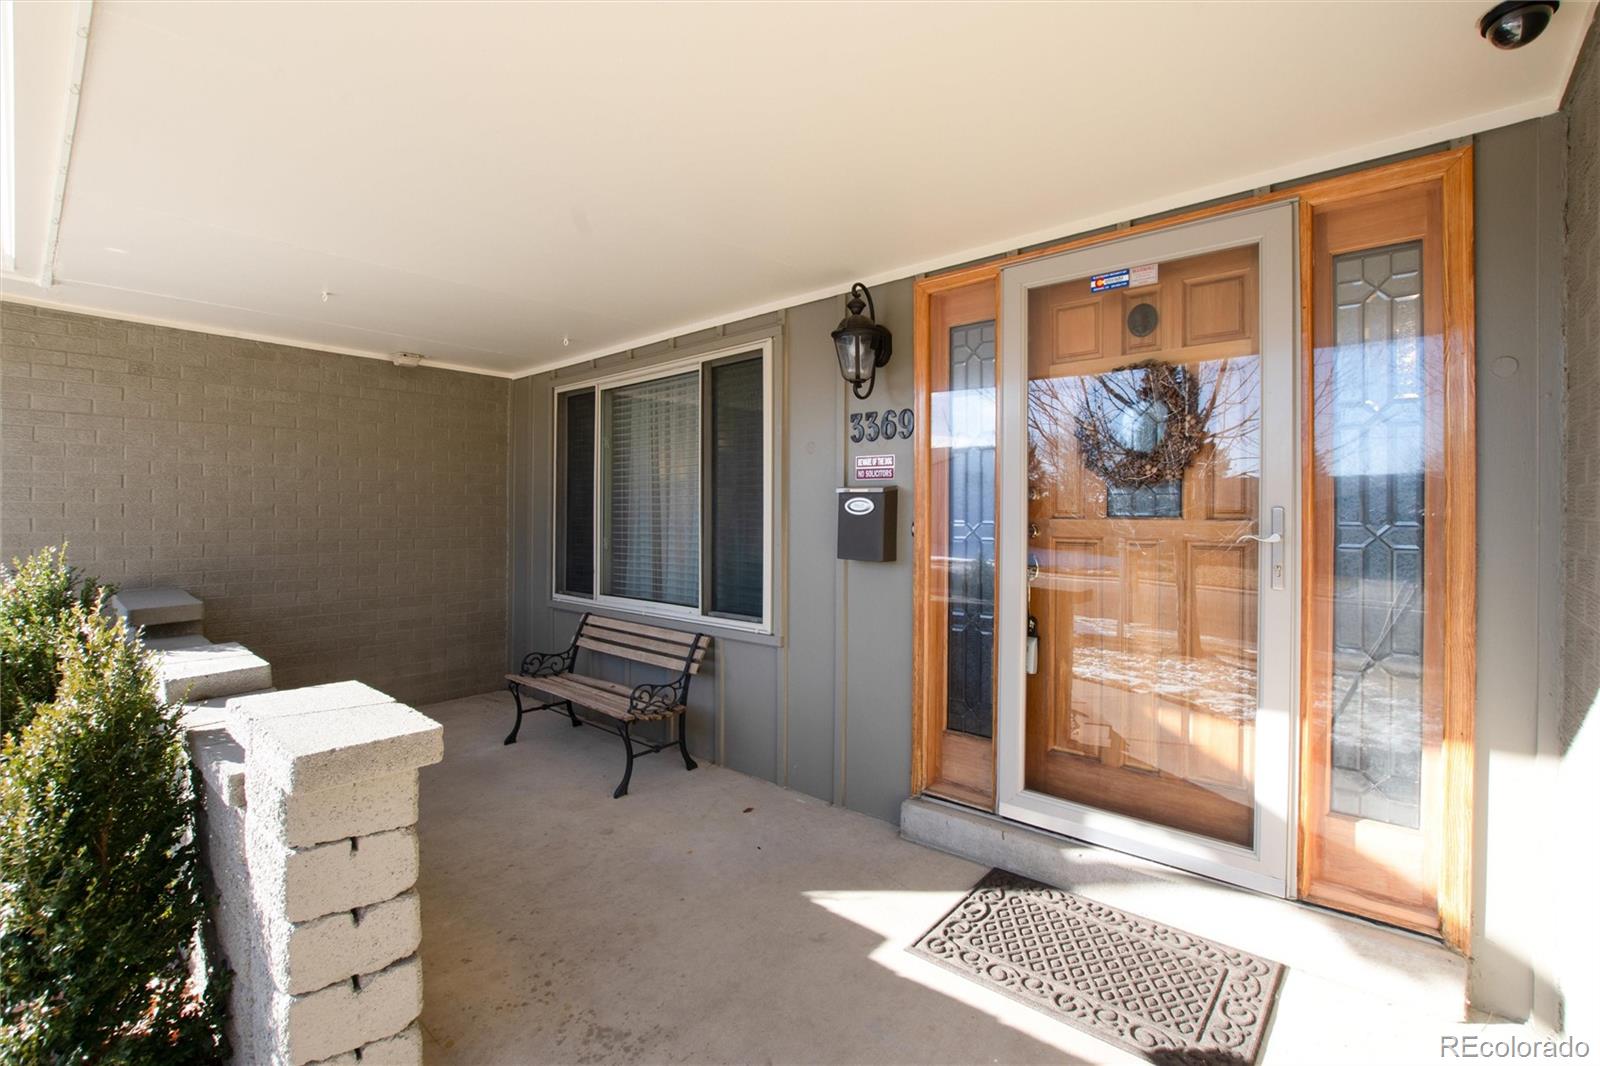 3369 s valentia court, Denver sold home. Closed on 2024-02-23 for $680,000.